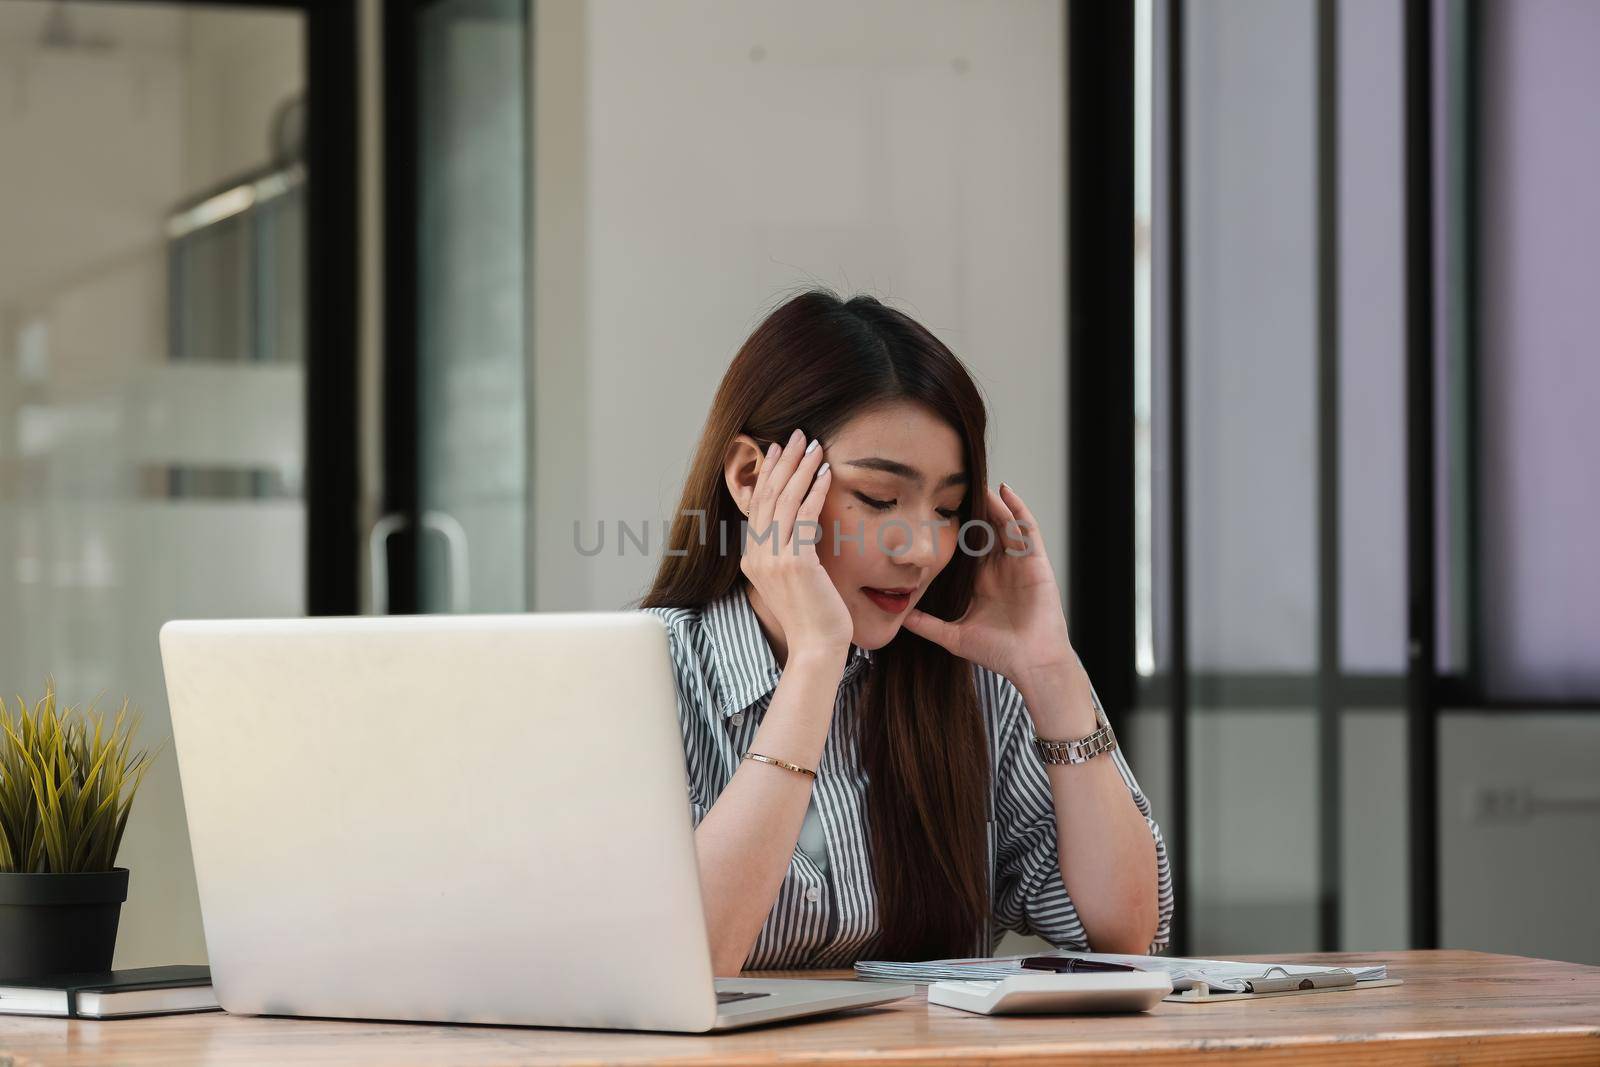 Stressed young woman sitting at desk working from home office, businesswoman headache while having a problem at work in office by nateemee